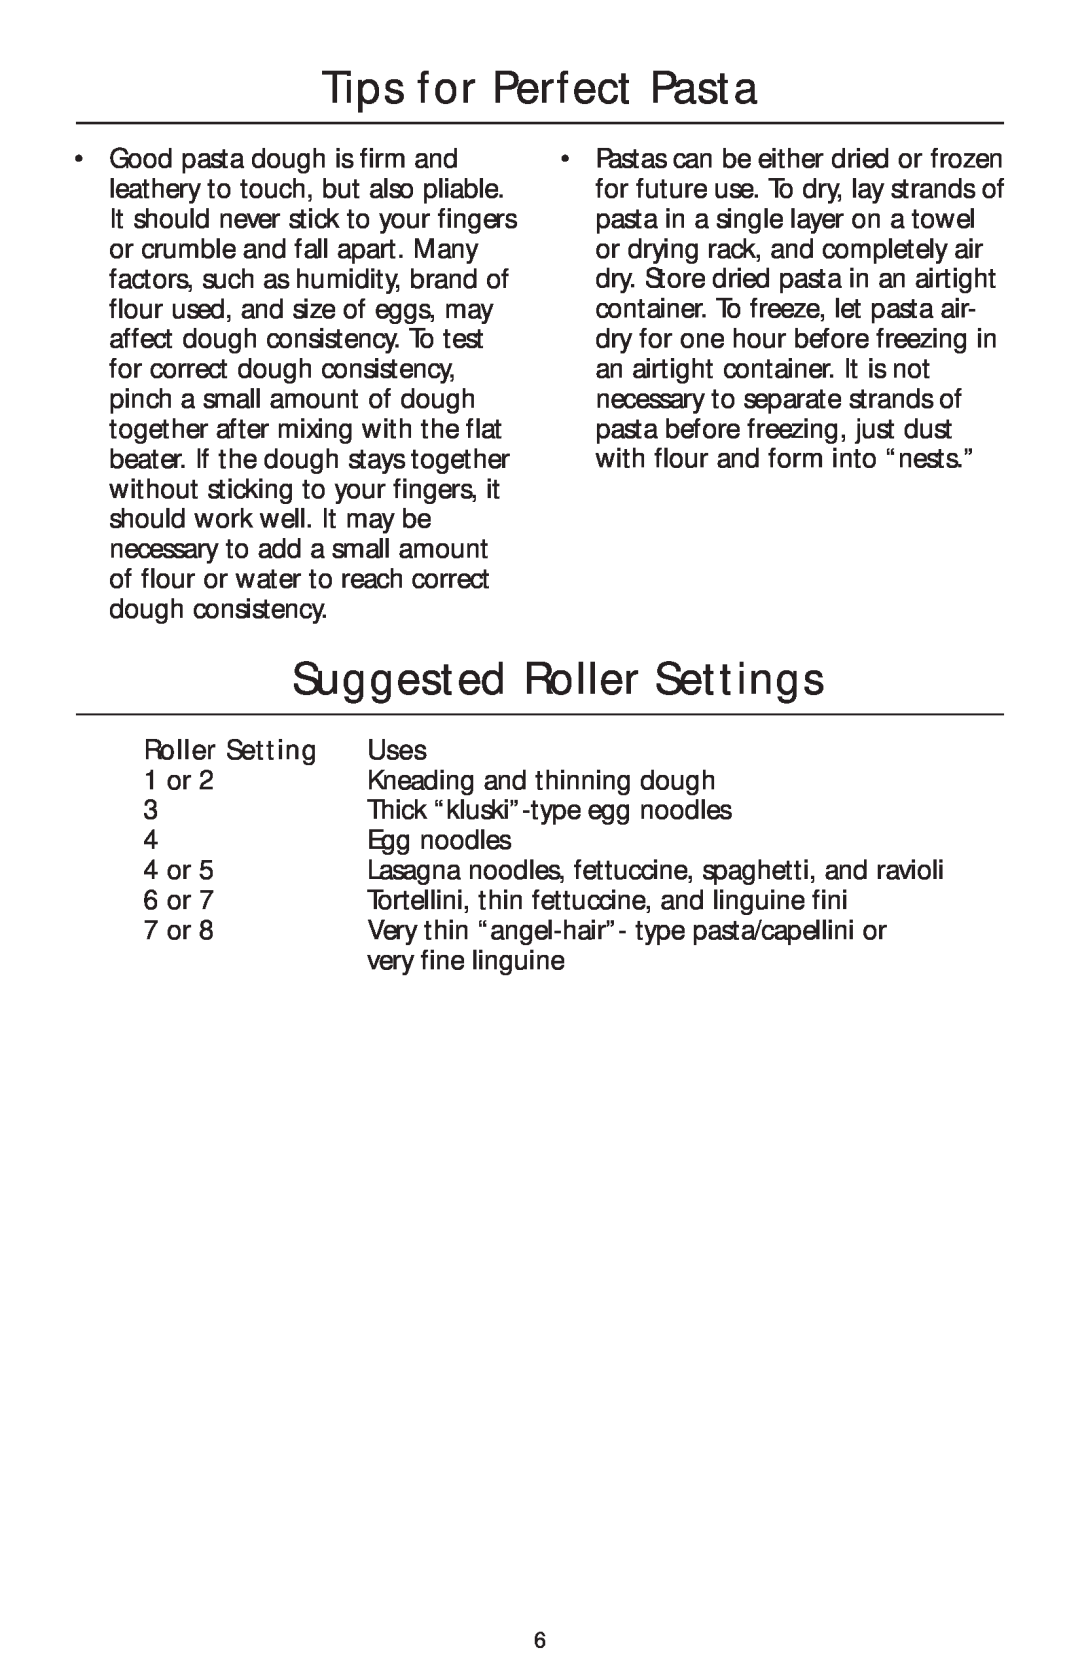 KitchenAid KPSA manual Tips for Perfect Pasta, Suggested Roller Settings, Uses 